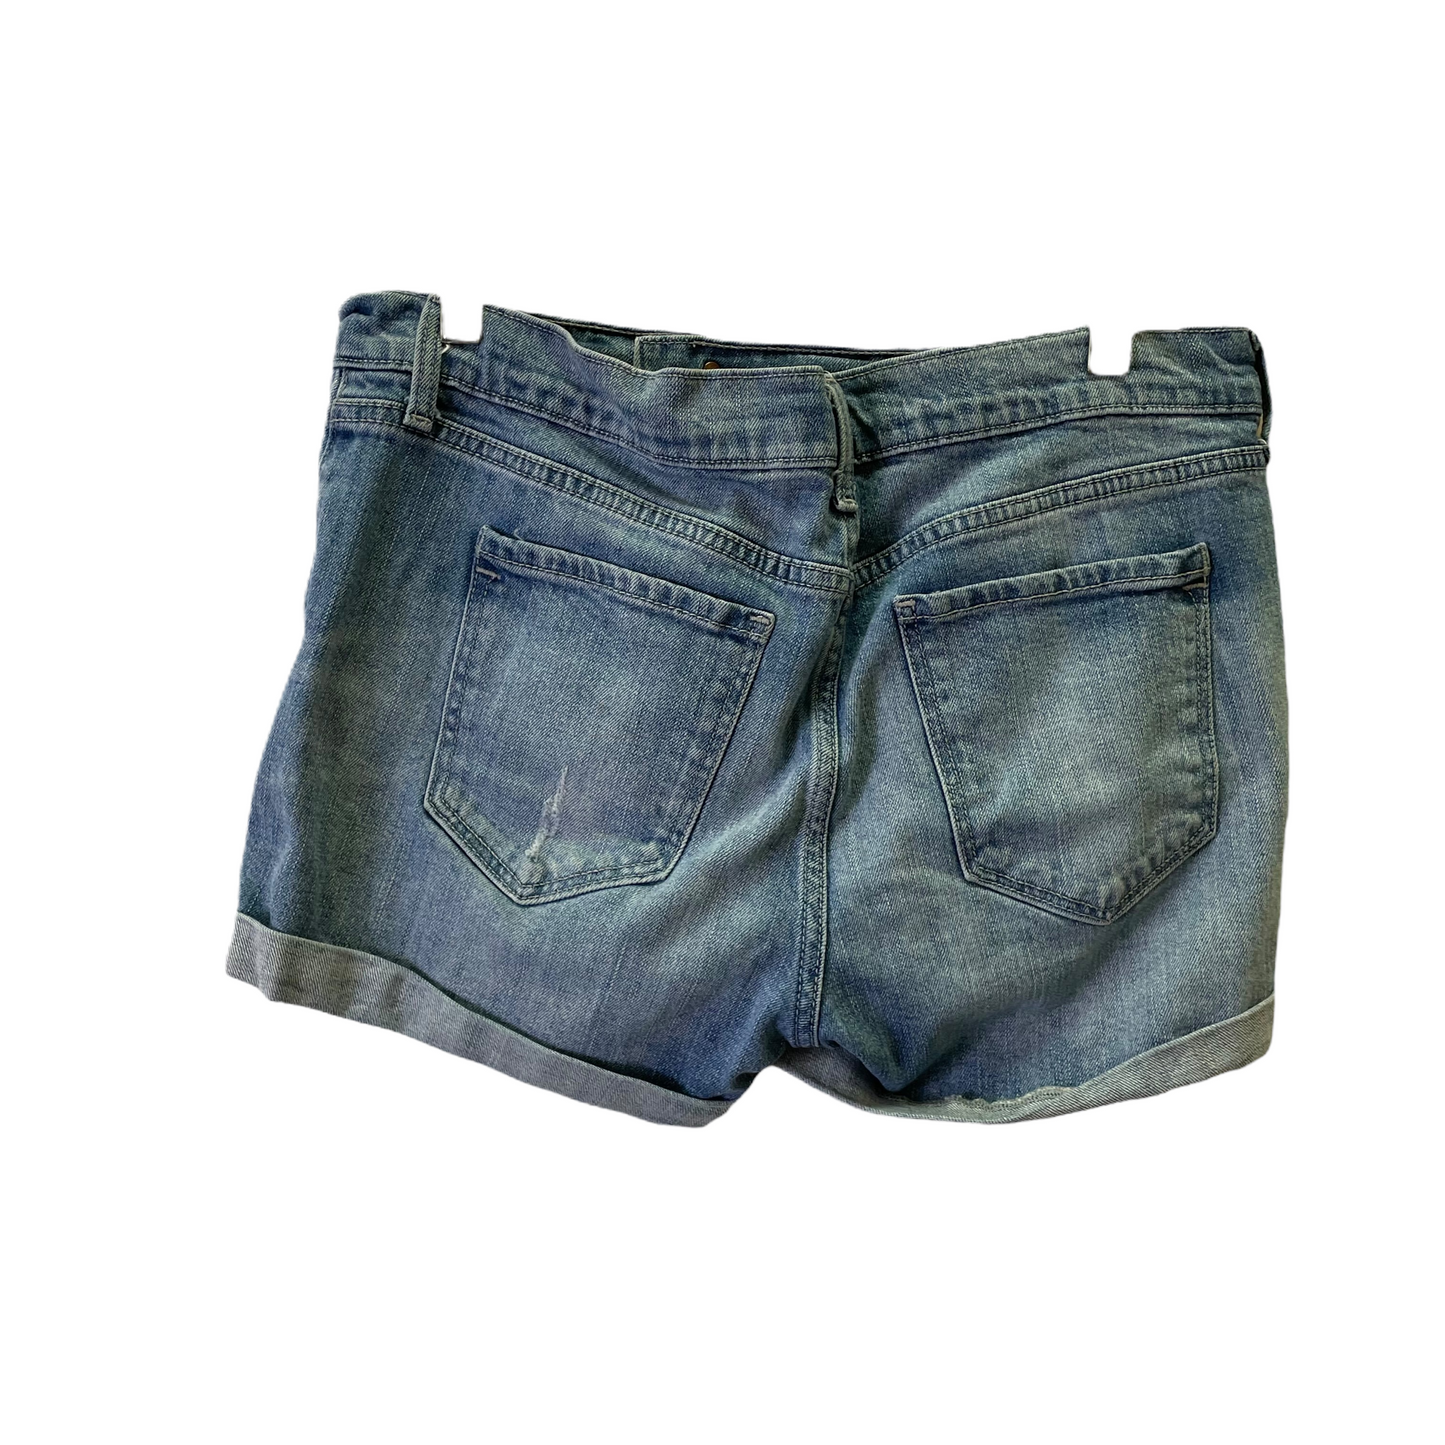 Blue Shorts By Old Navy, Size: 10